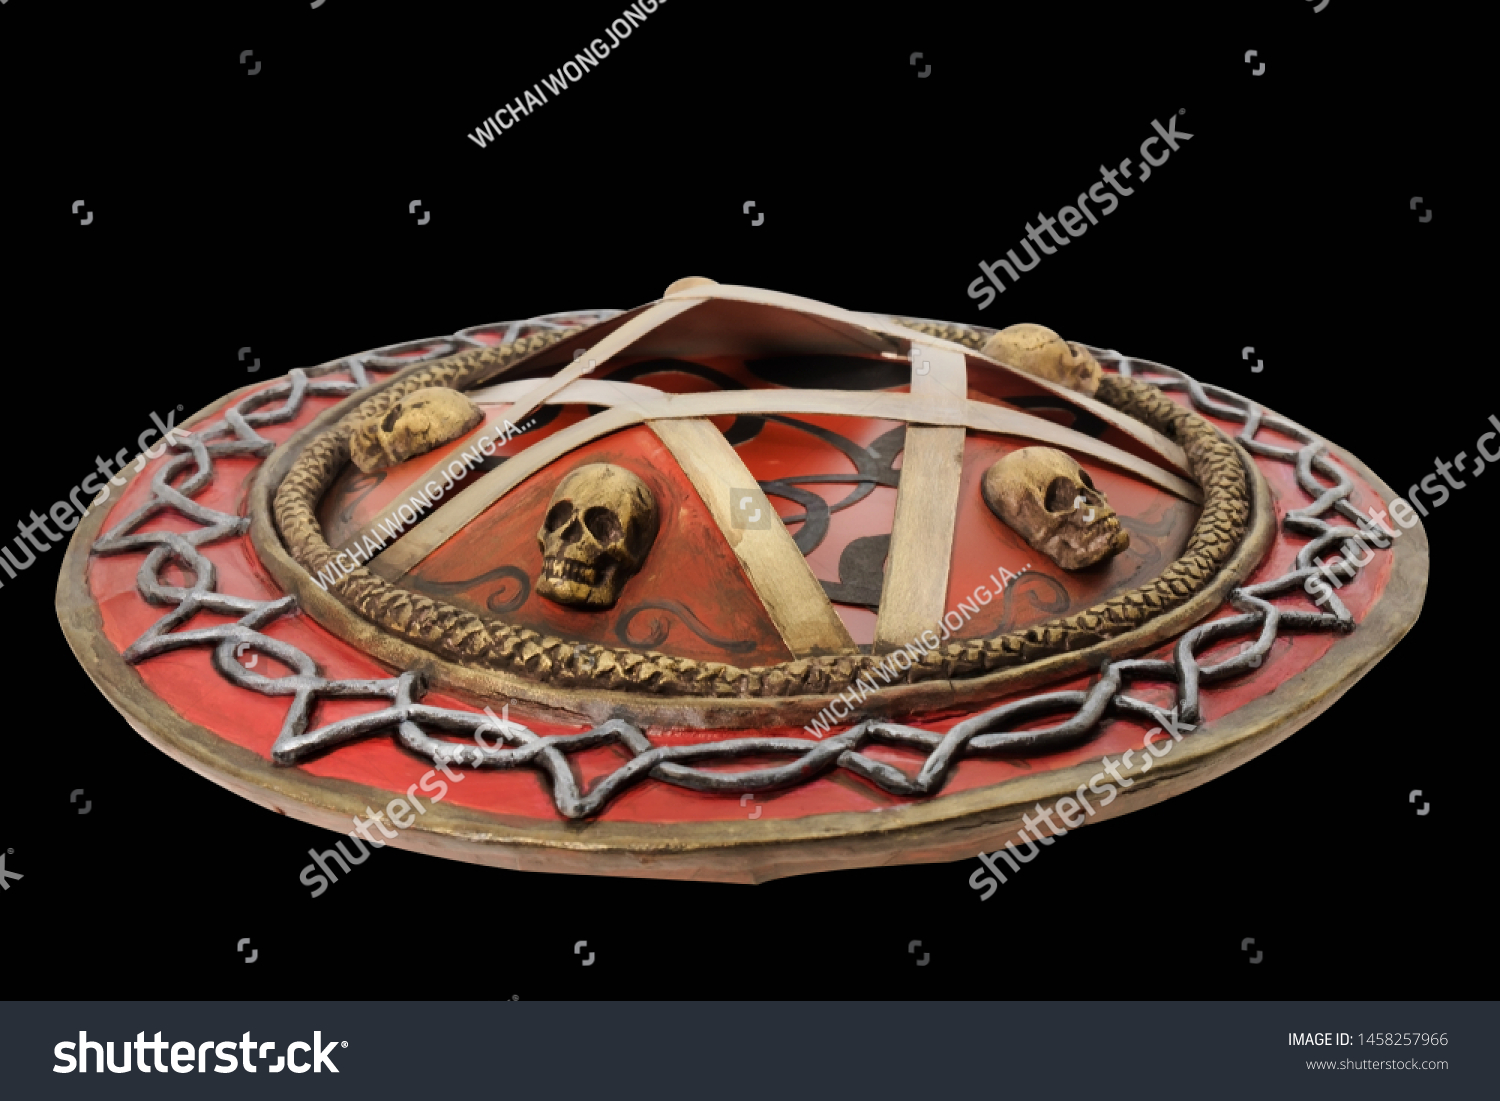 Pentacle Shield On Black Background Paper Royalty Stock Image